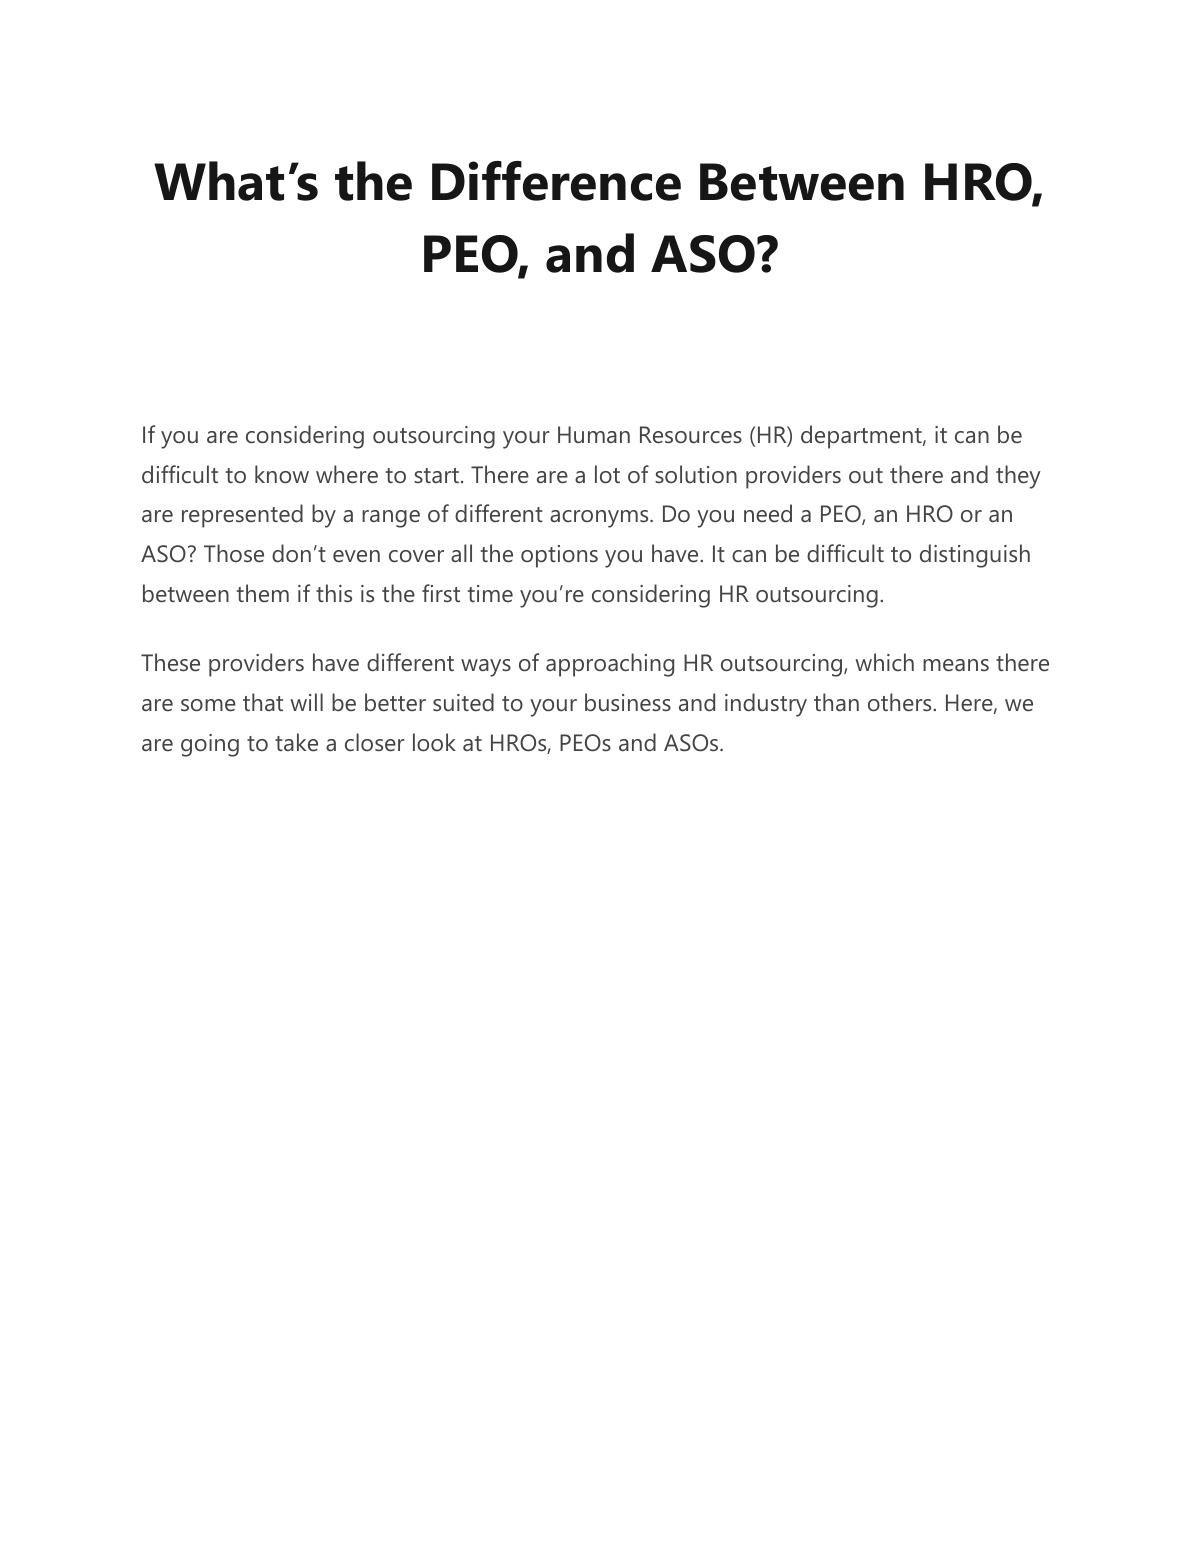 What’s the Difference Between HRO, PEO, and ASO? 